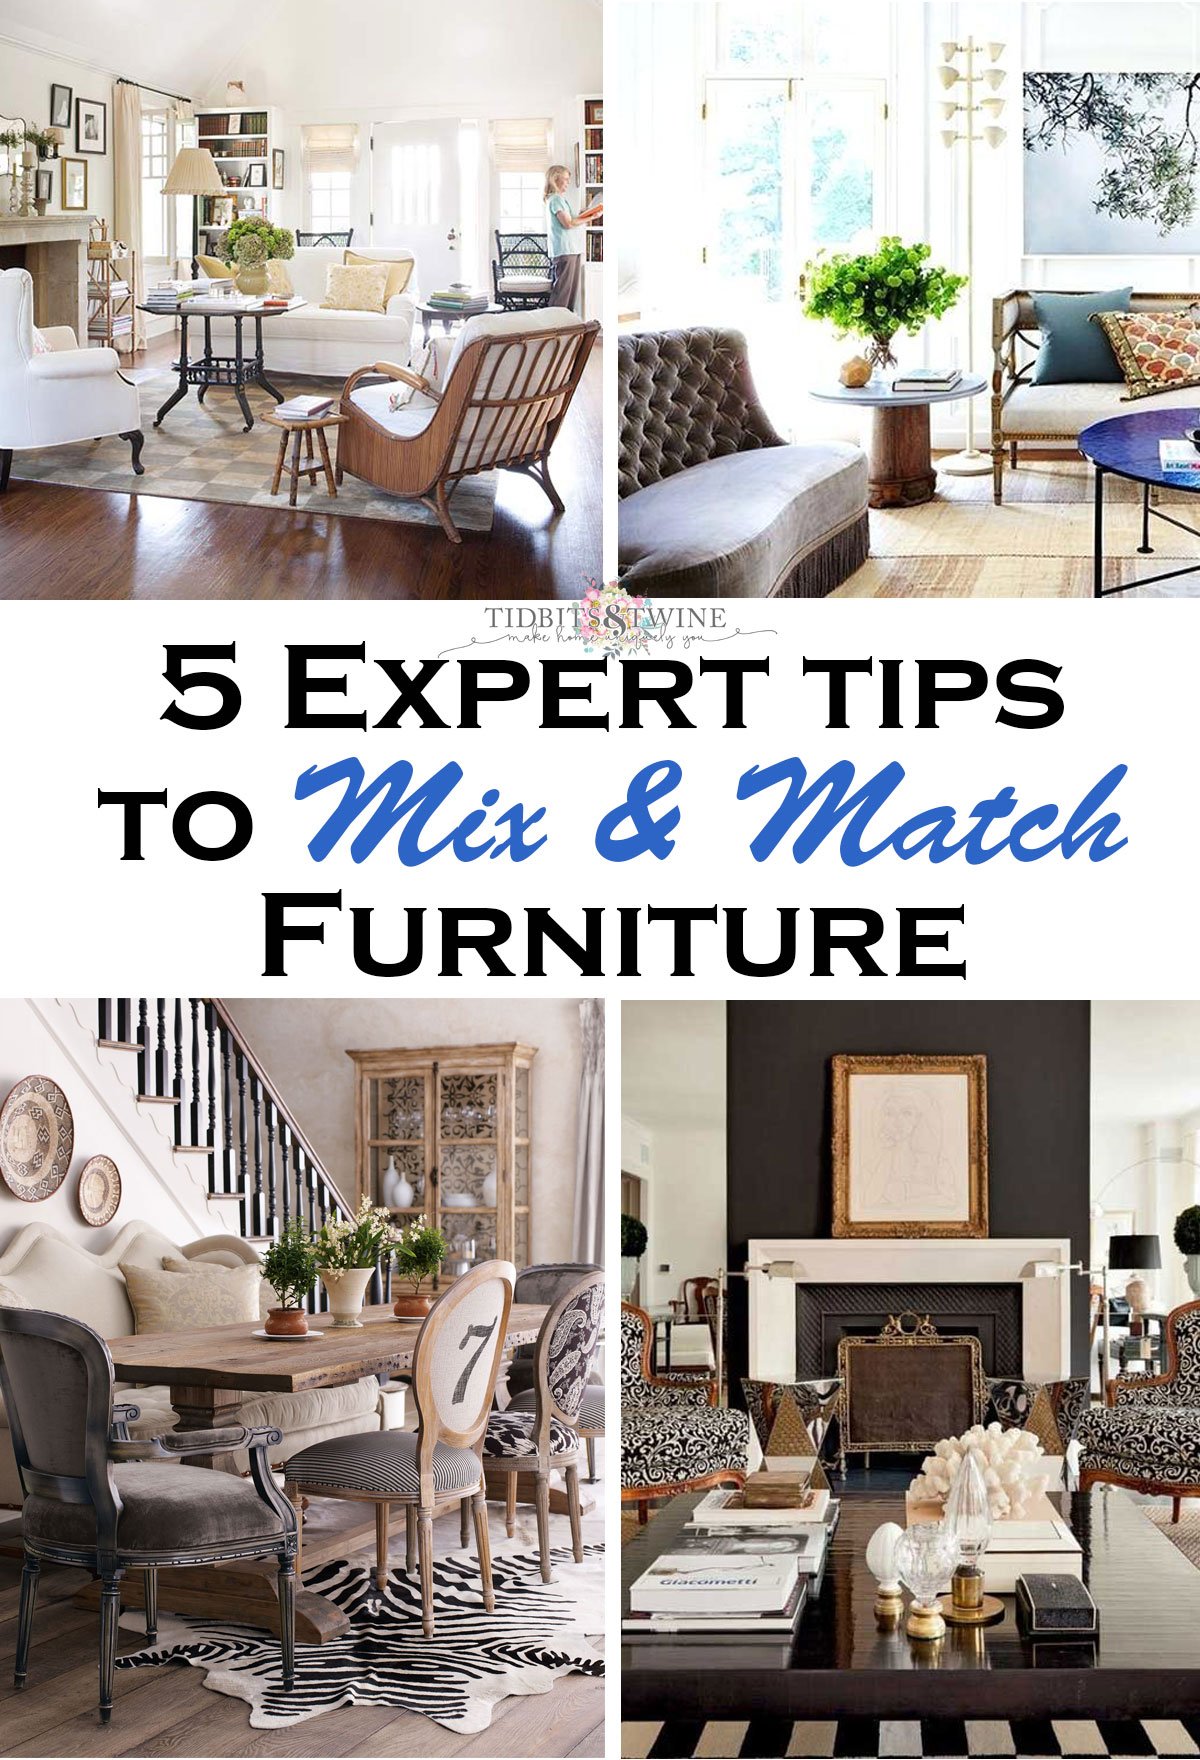 5 Expert Tips for Mixing Furniture for a Curated and Cohesive Look!